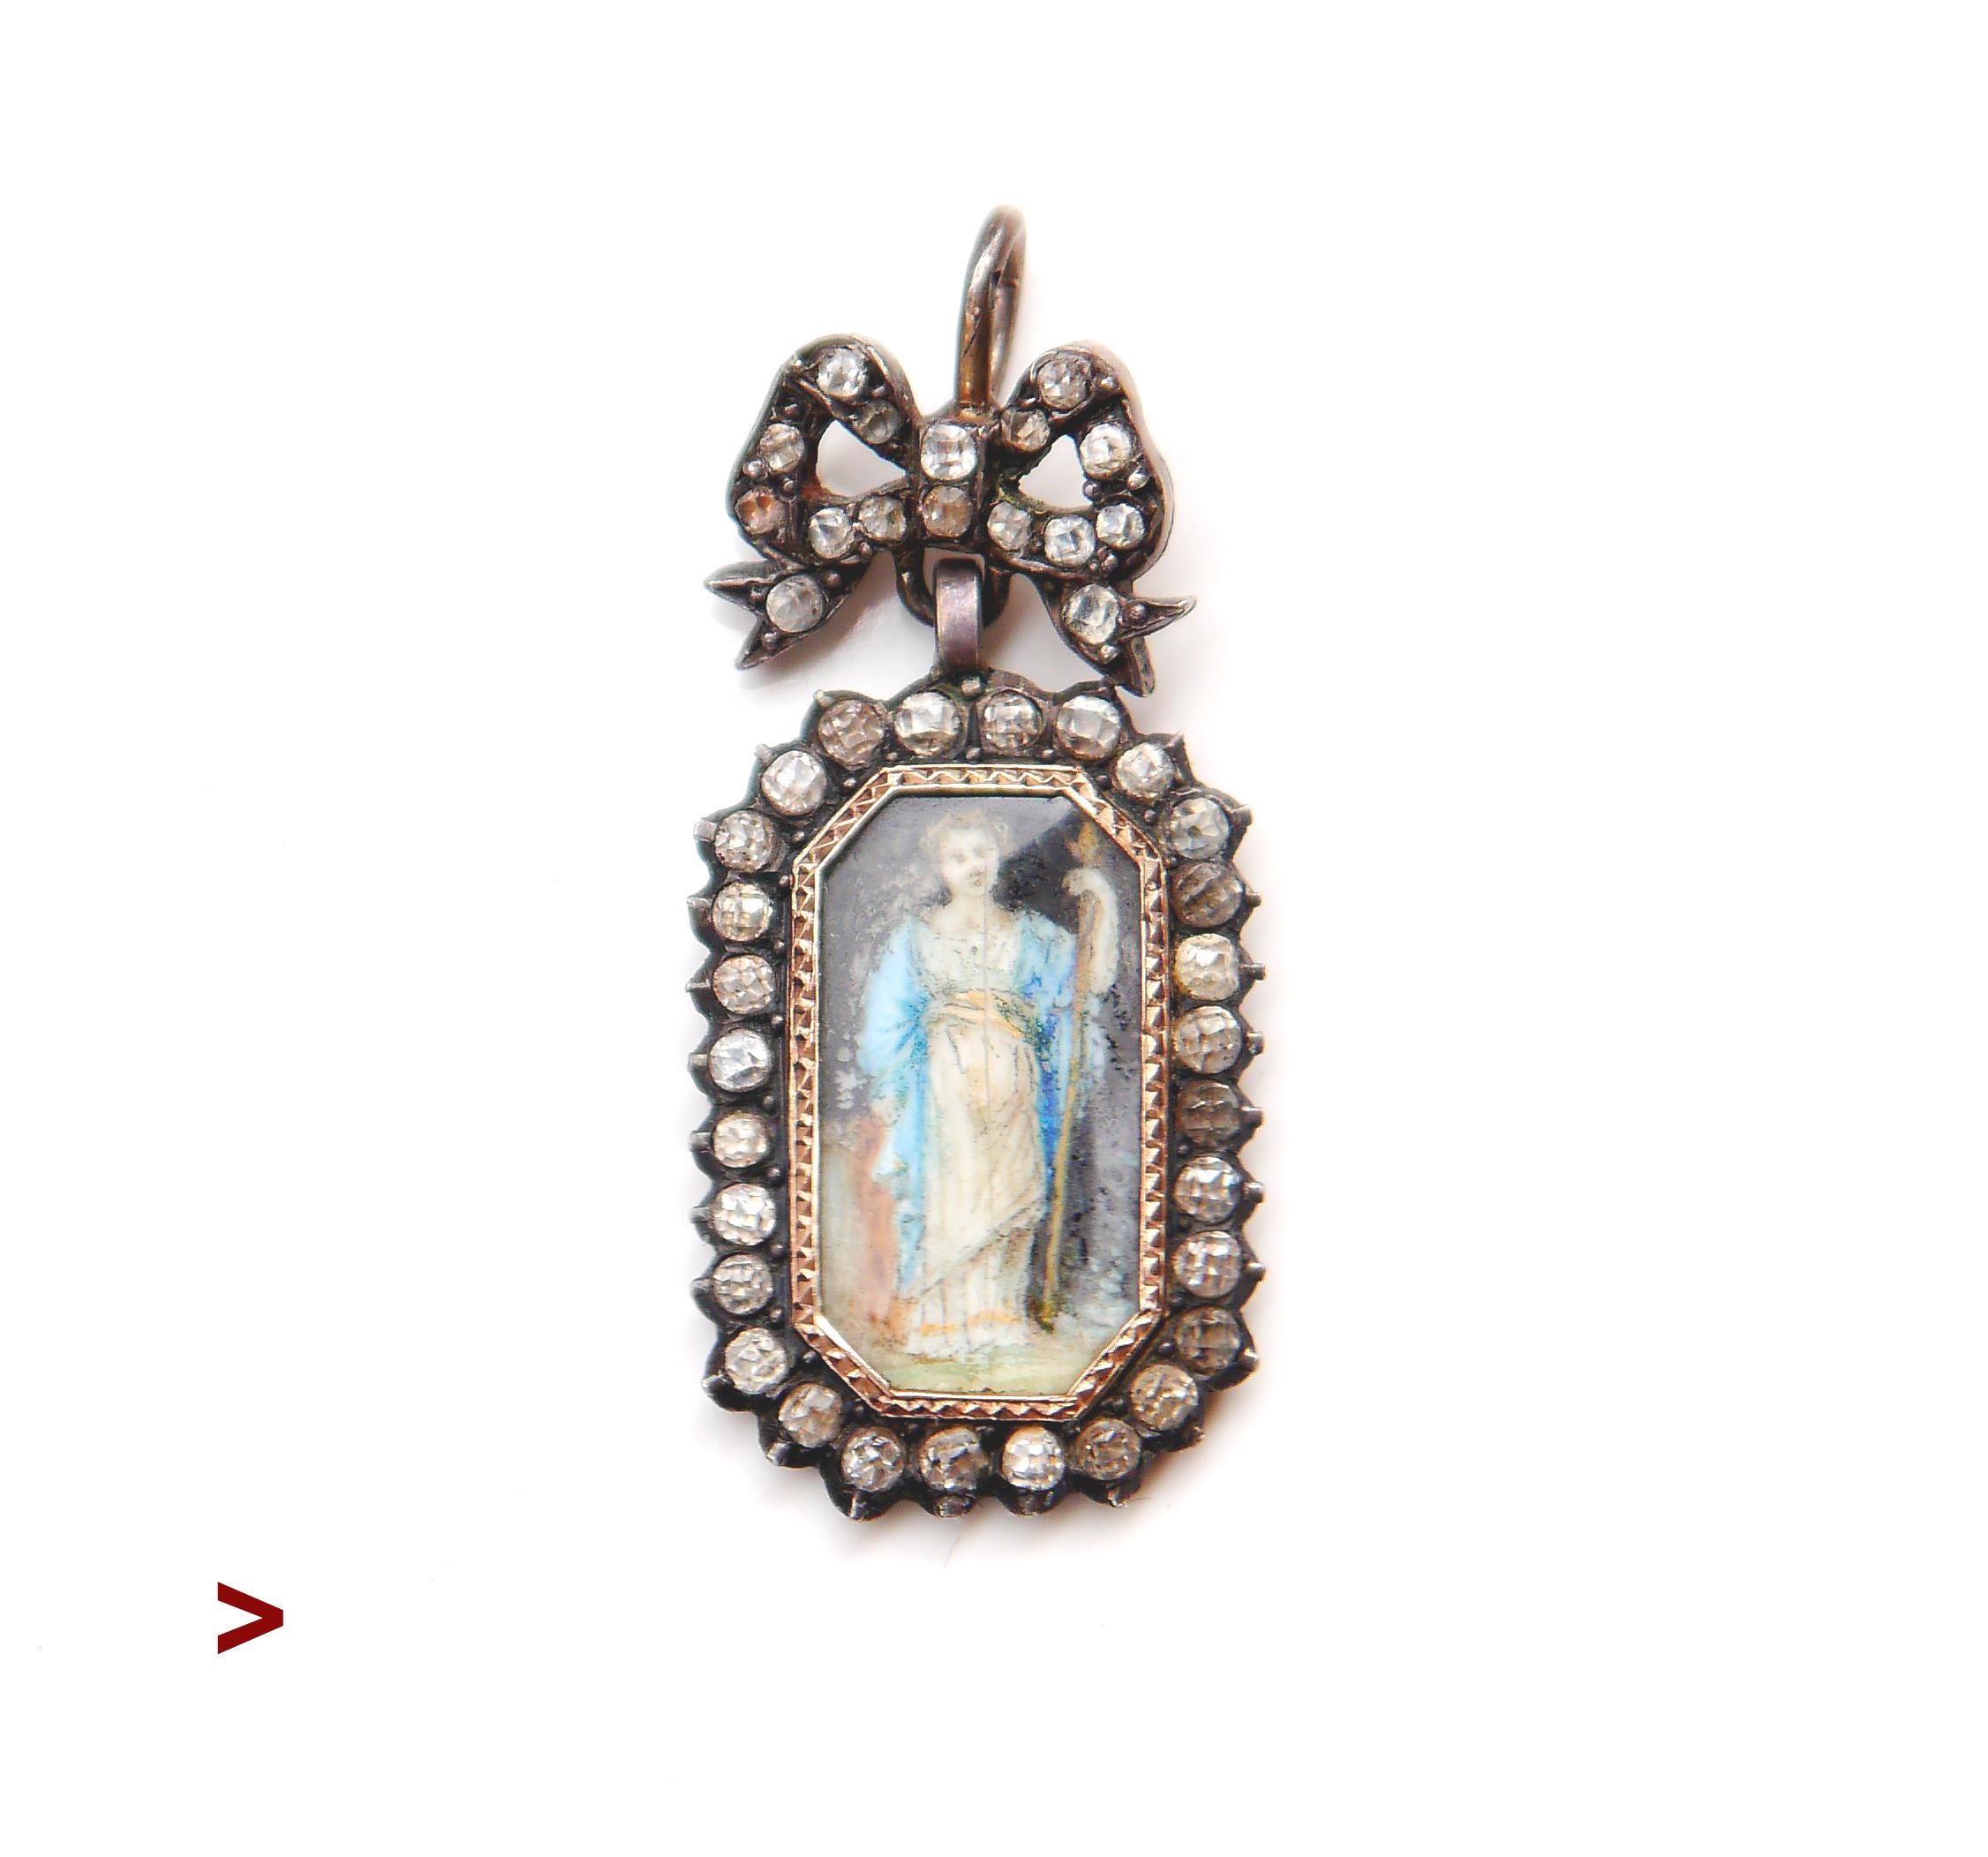 Antique Pendant with a miniature painting 16mm x 8 mm of the ancient Greek Goddess of harvest and fertility Demeter. The painting is concealed within a miniature frame made of gilt Silver with solid Gold bezel decorated with multiple old diamond-cut